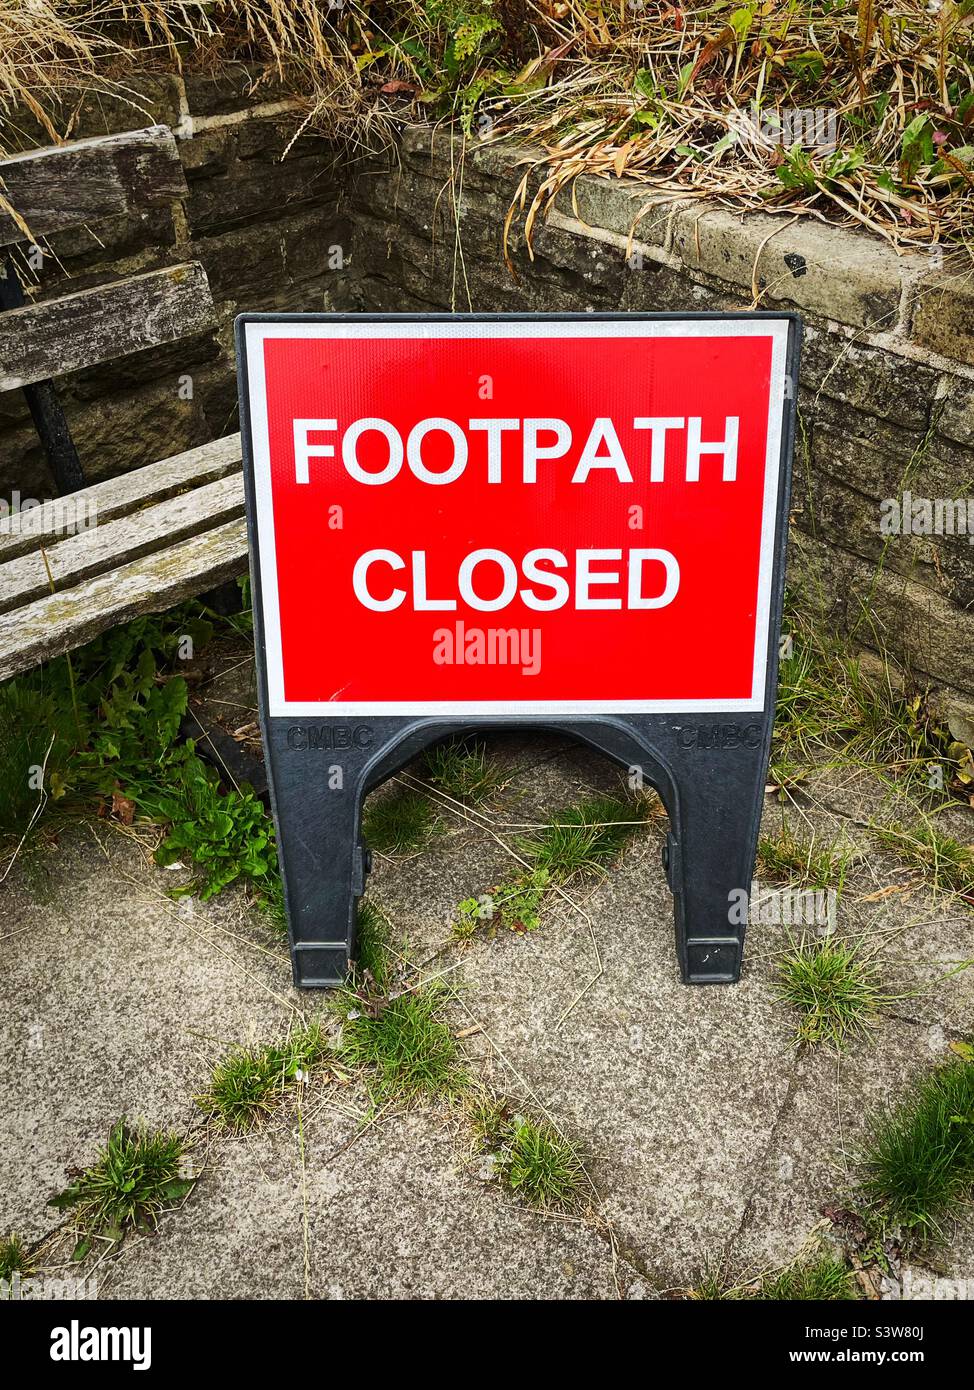 ‘No Access’ a footpath closed sign blocks the way forward for pedestrians Stock Photo